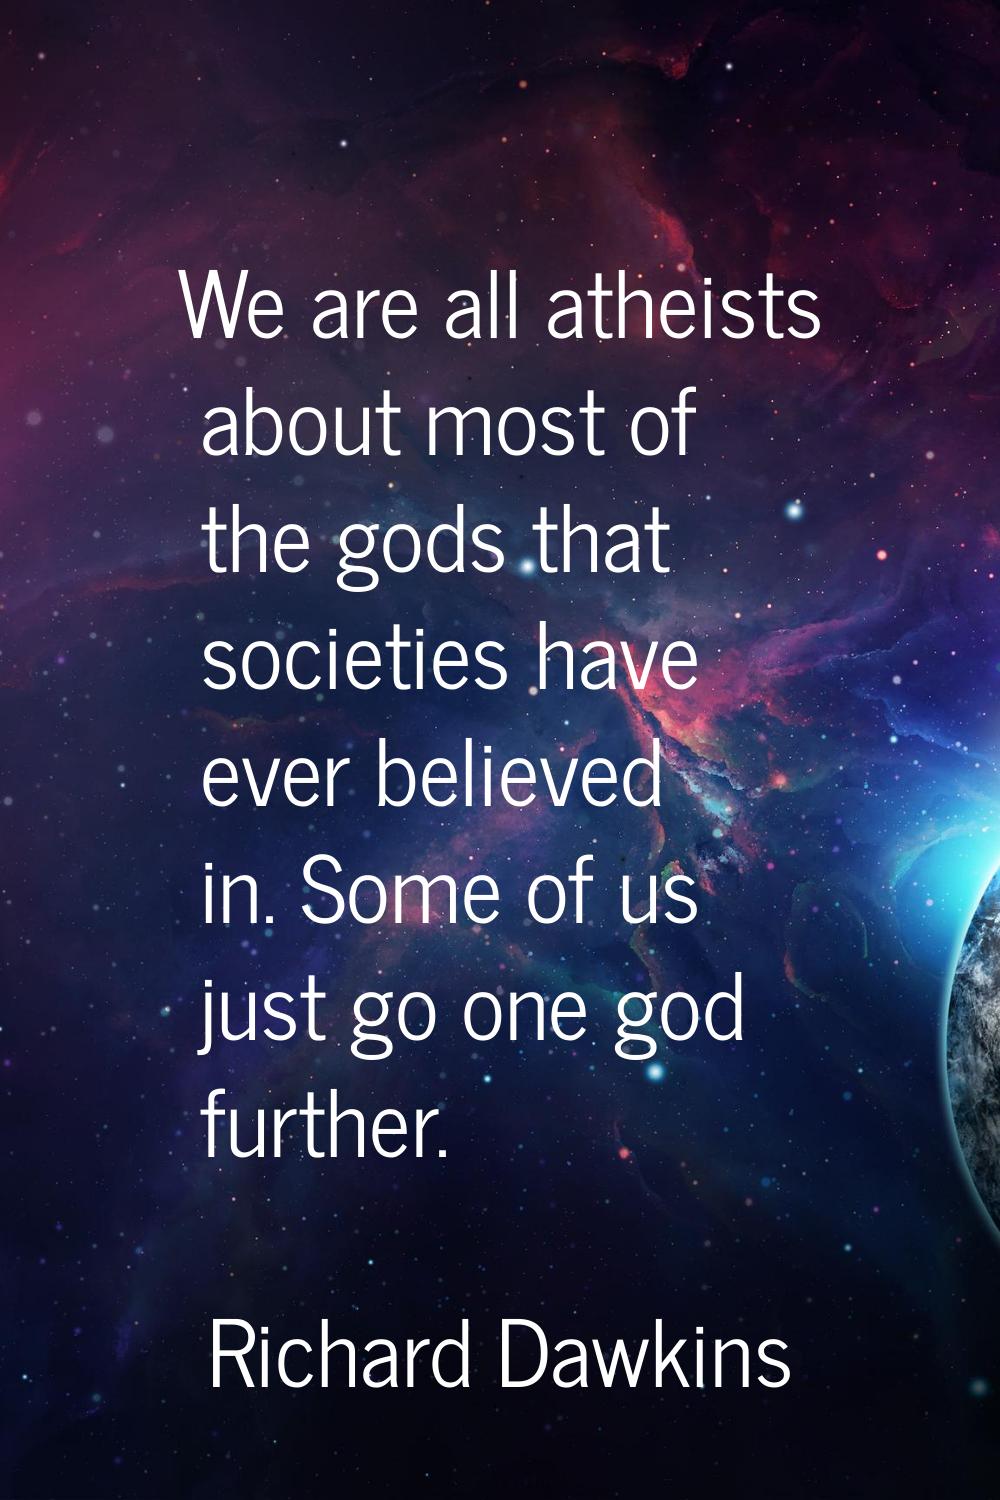 We are all atheists about most of the gods that societies have ever believed in. Some of us just go